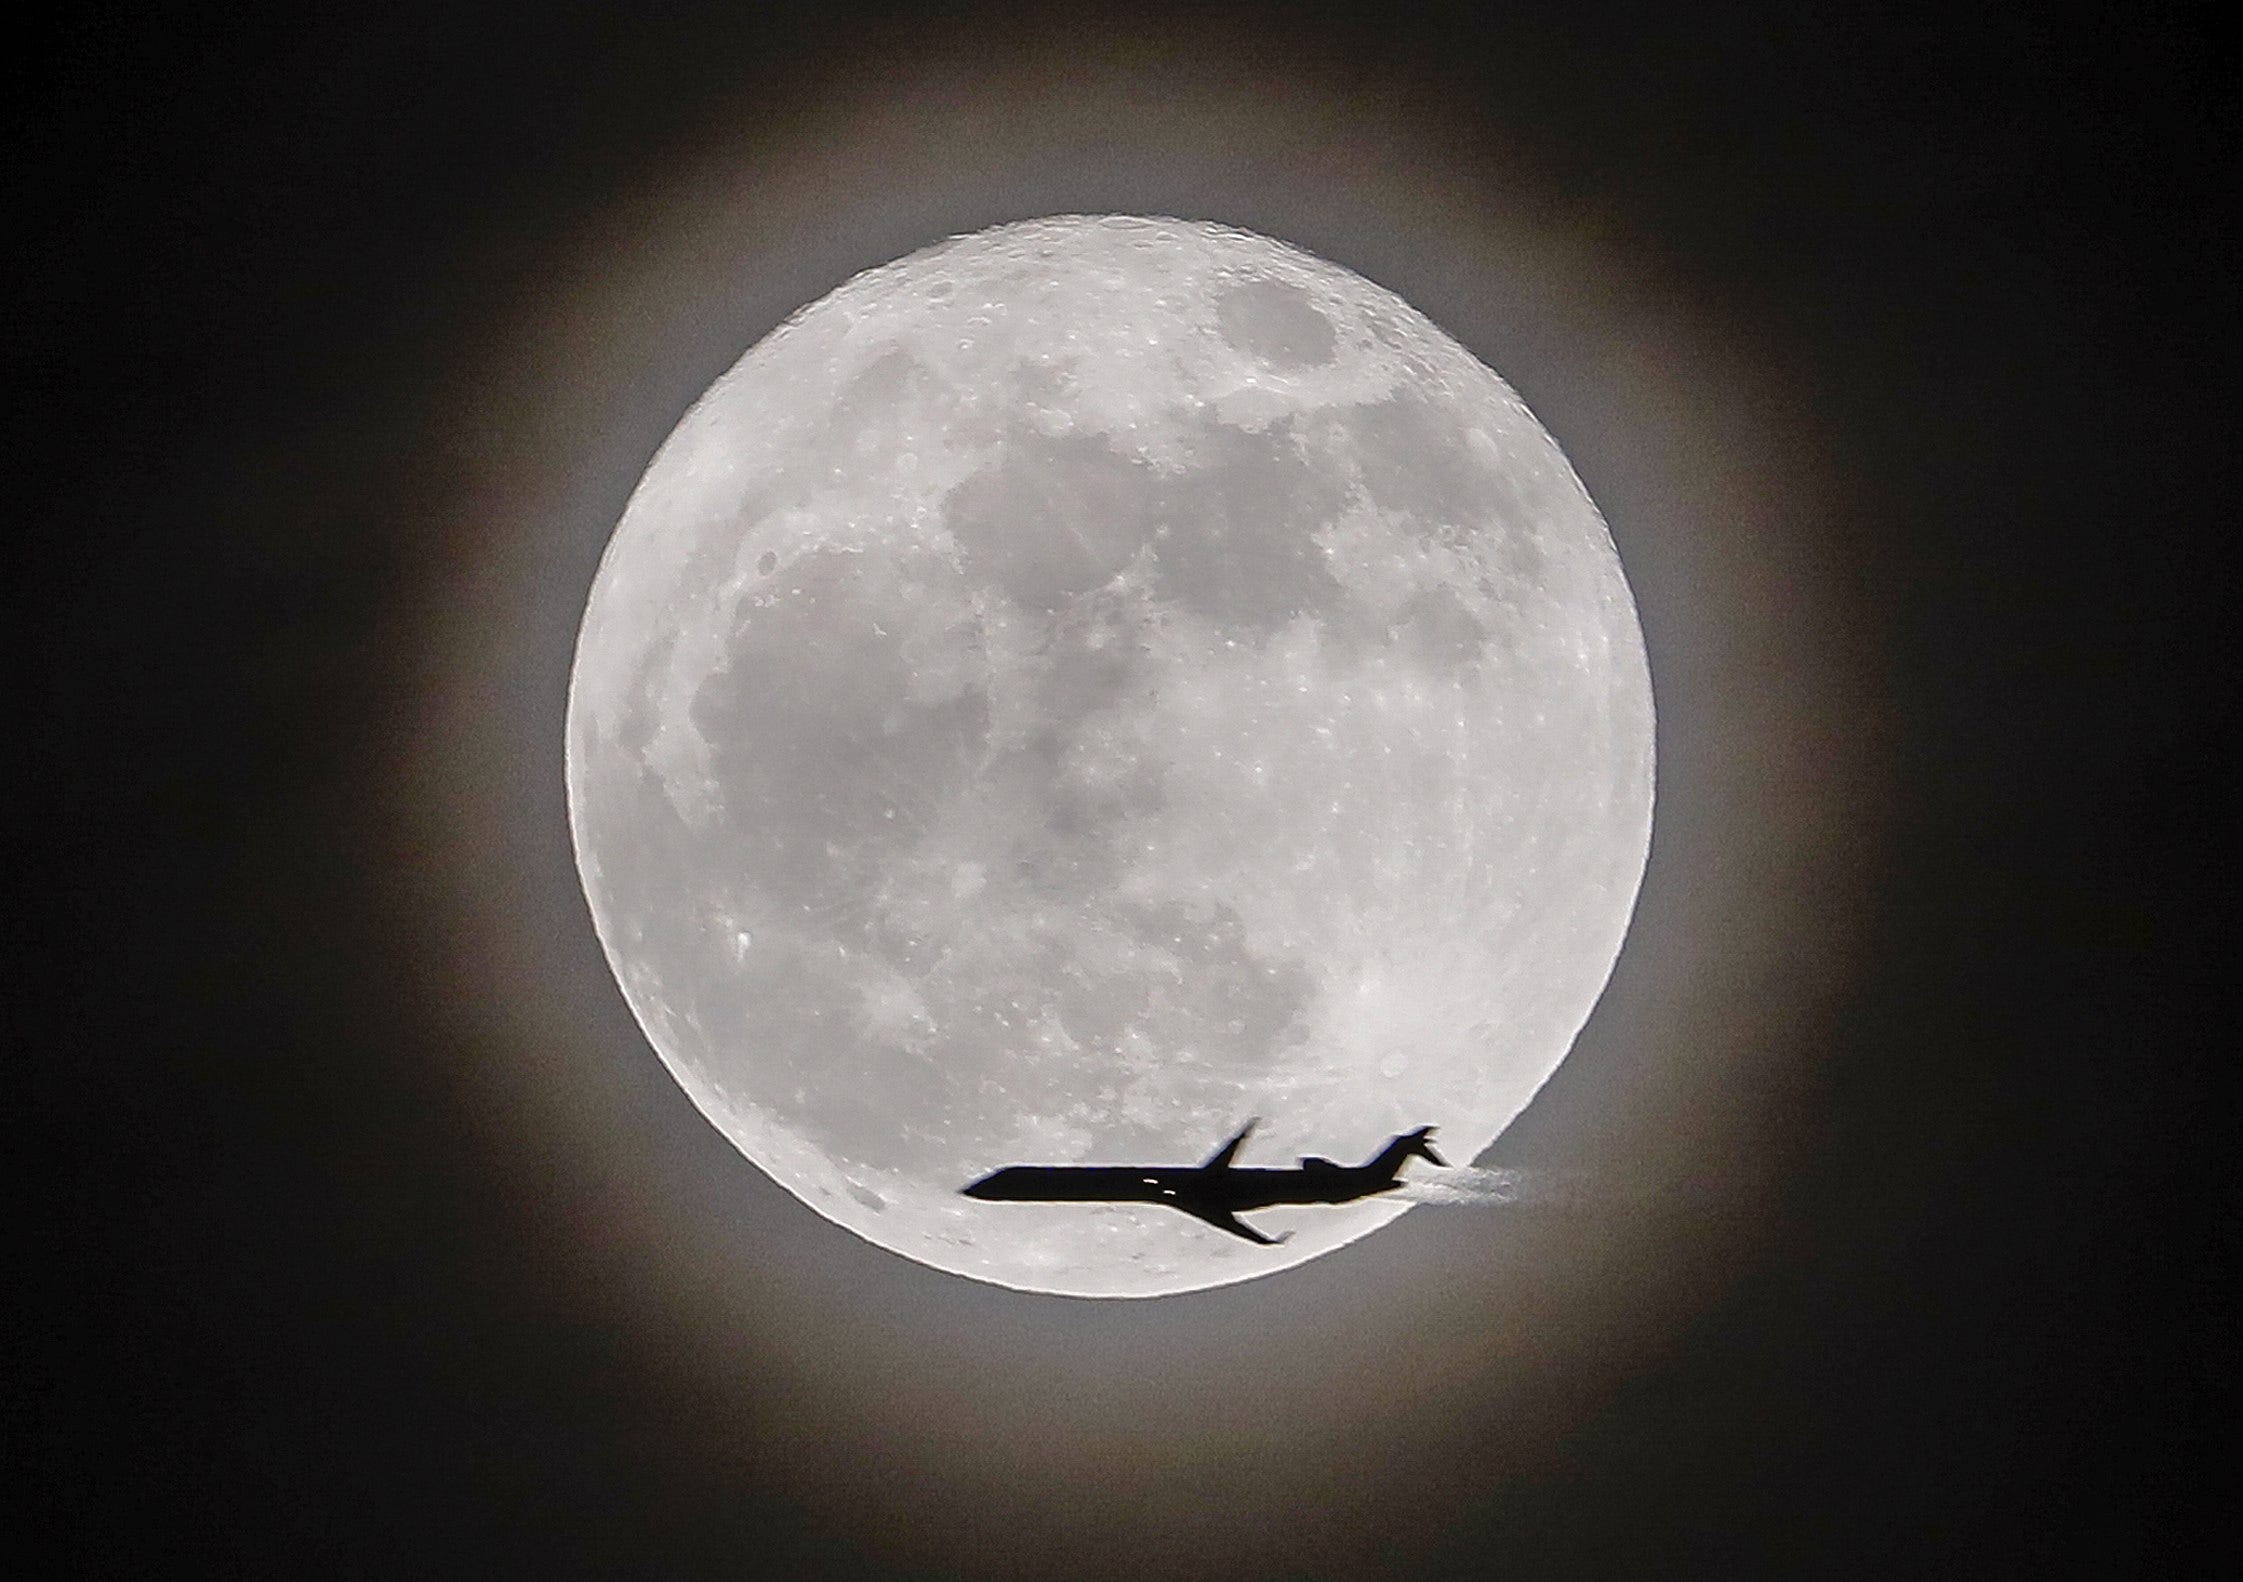 Supermoon? Snow Moon? Full moon? Whatever you call it, a lunar spectacle is coming soon